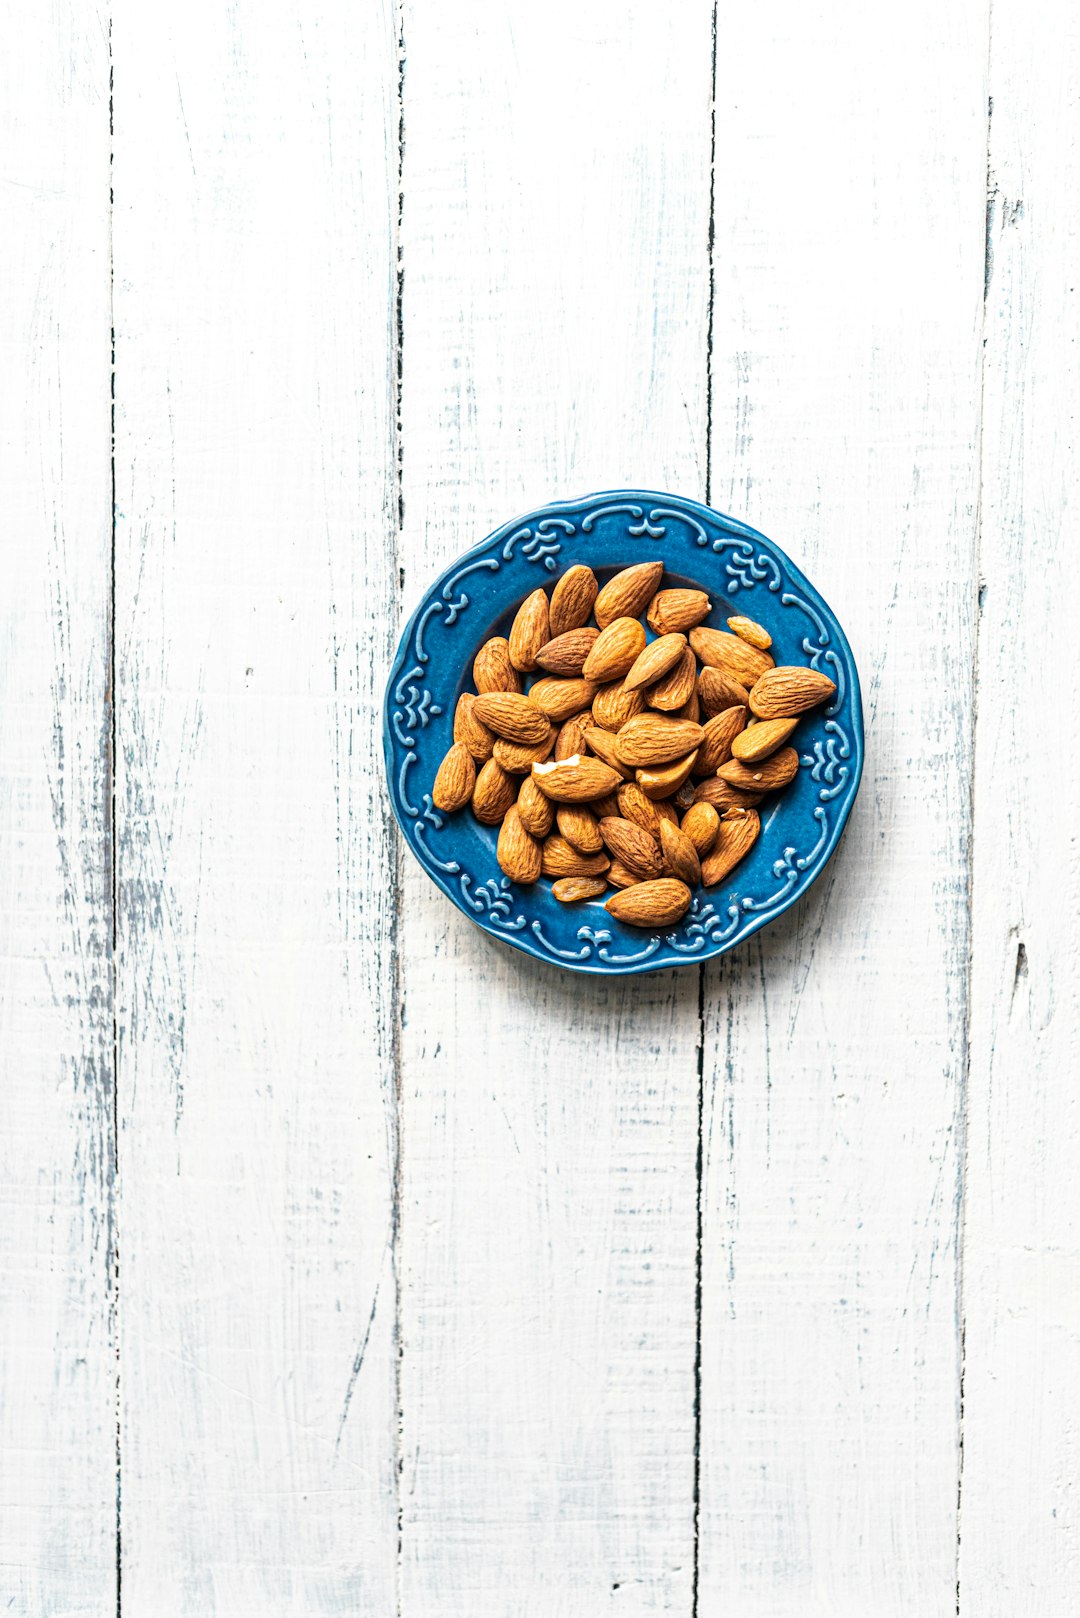 brown nuts on blue round plate